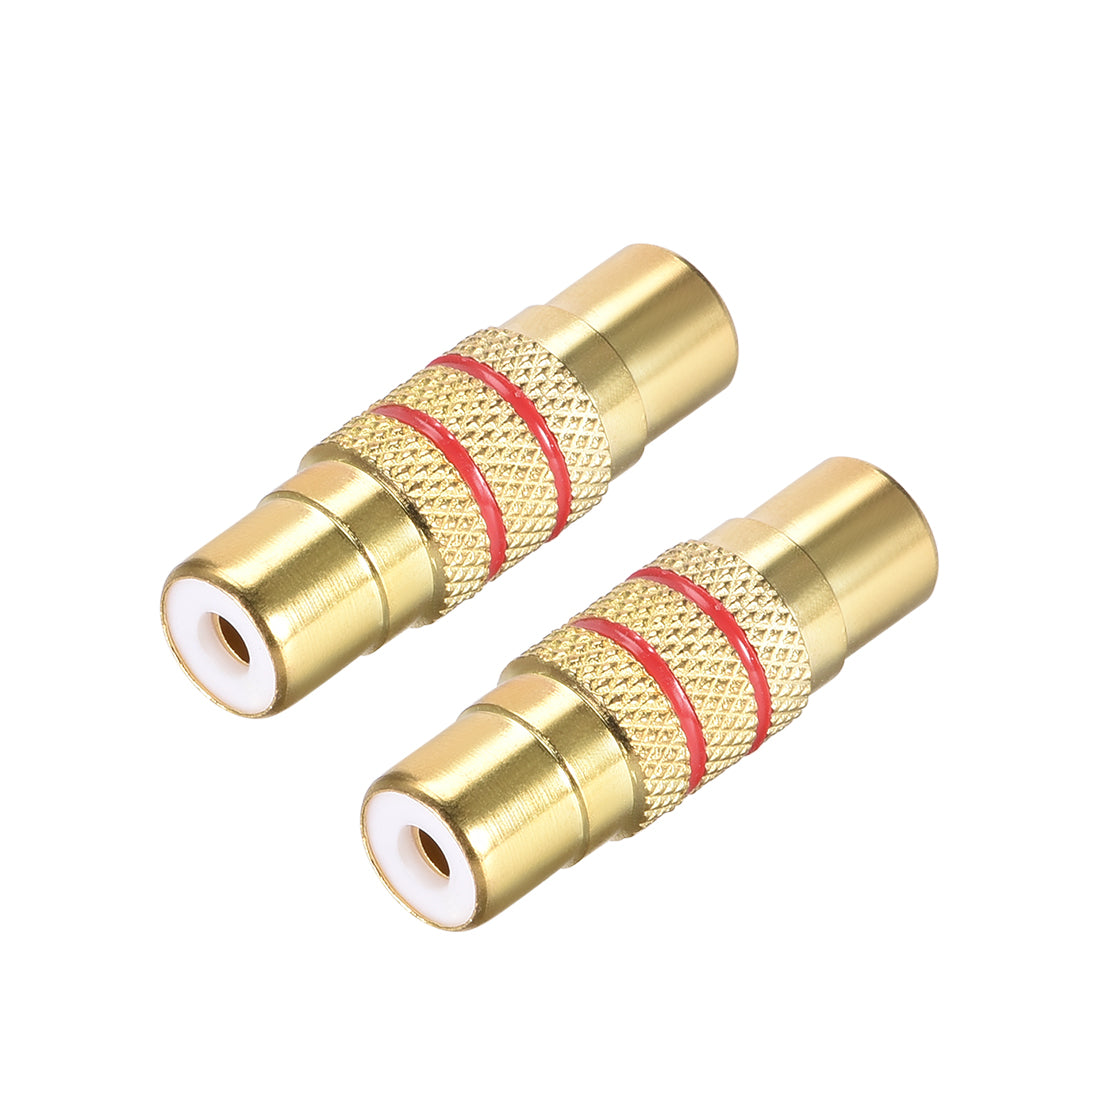 uxcell Uxcell RCA Female to Female Connector Adapter Coupler for Stereo Audio Video AV TV Cable Convert 2Pcs Gold Tone